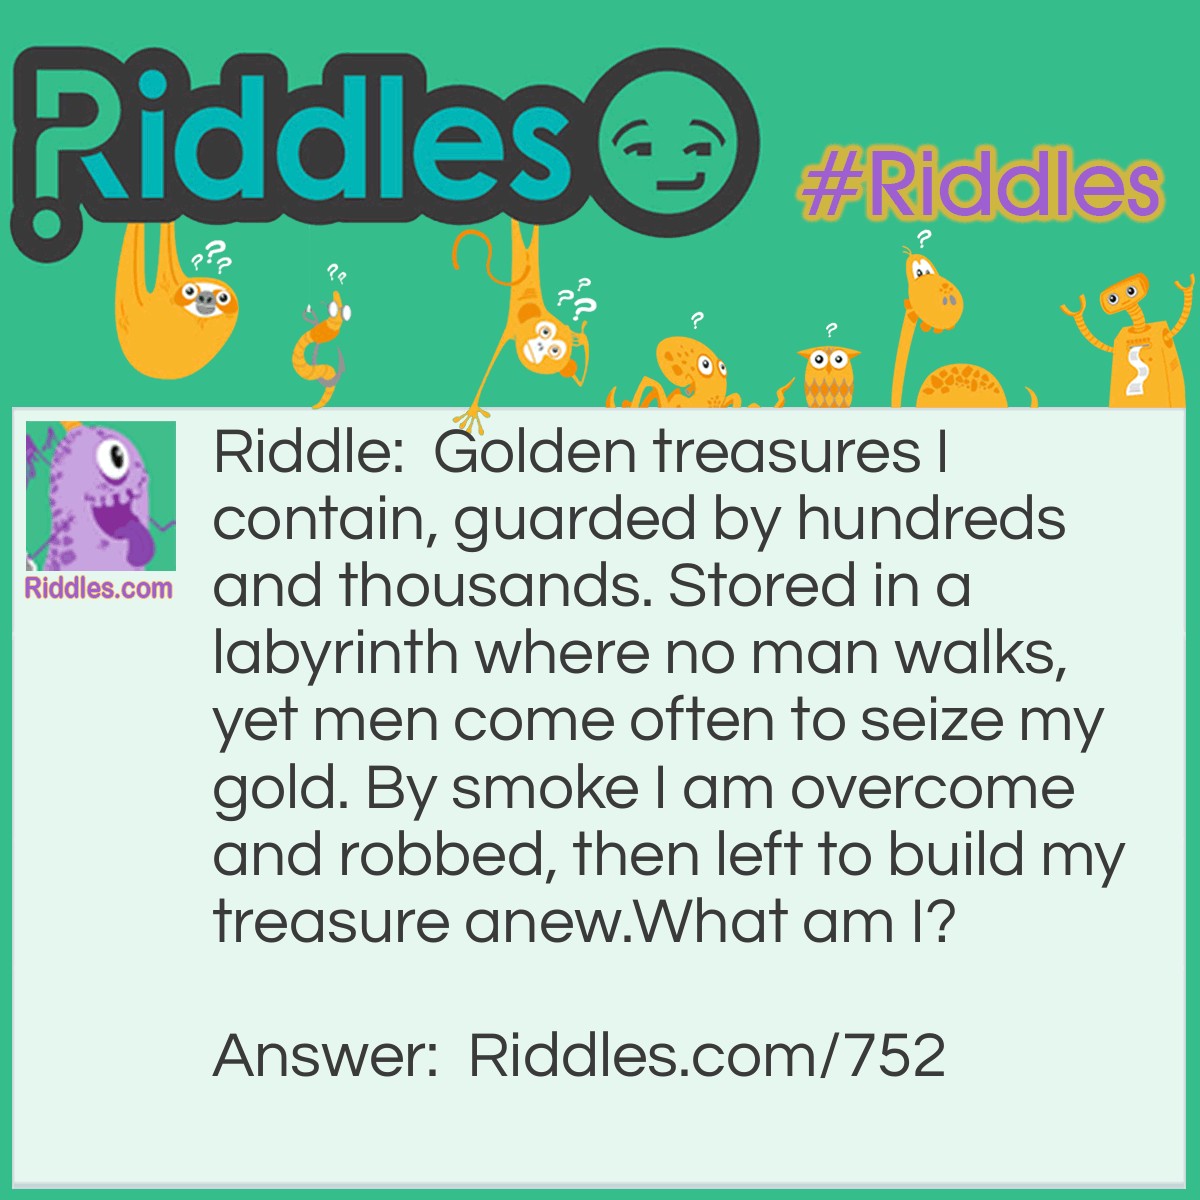 Riddle: Golden treasures I contain, guarded by hundreds and thousands. Stored in a labyrinth where no man walks, yet men come often to seize my gold. By smoke, I am overcome and robbed, then left to build my treasure anew.
What am I? Answer: A beehive.